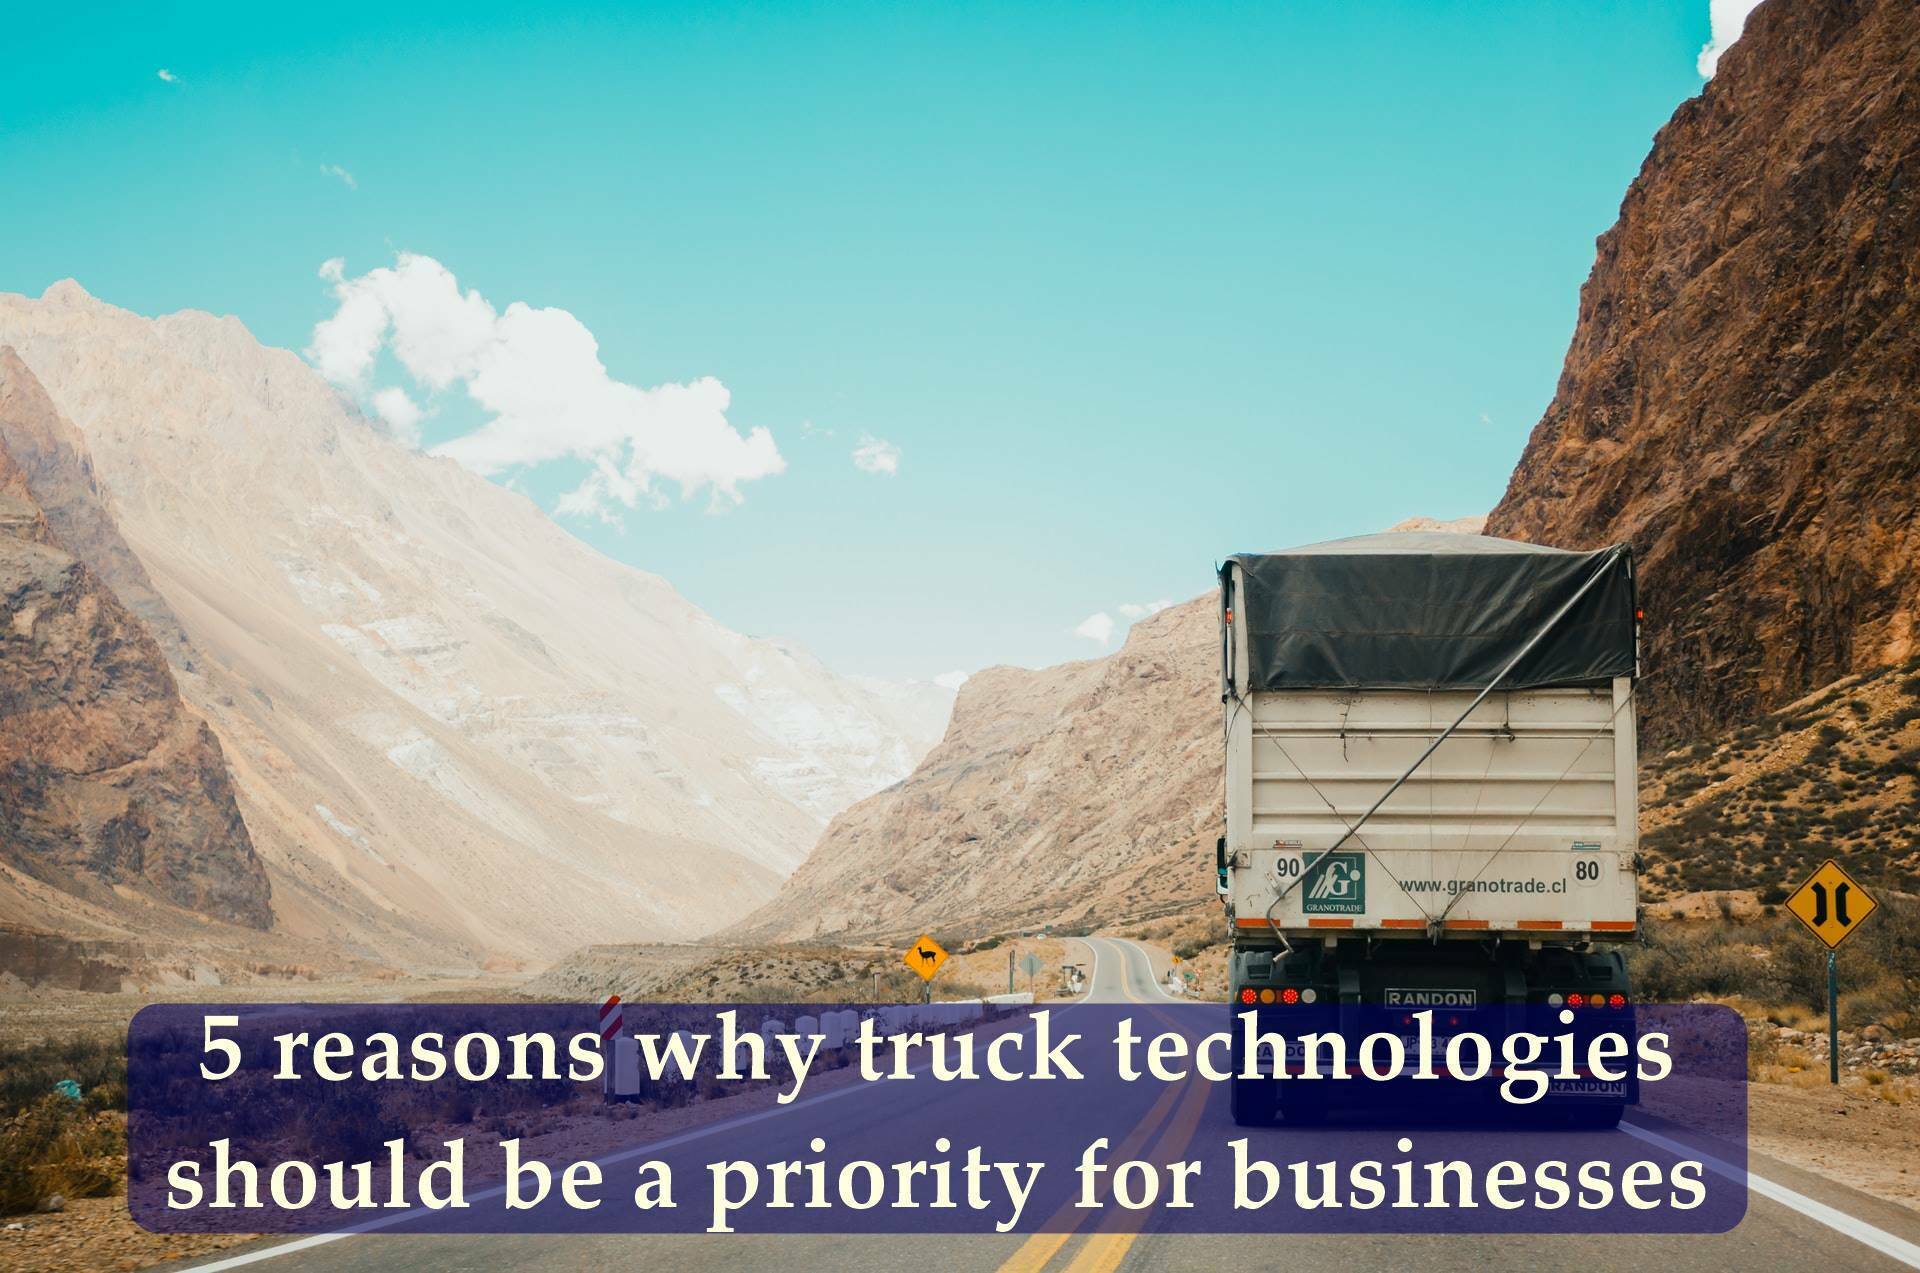 5 reasons why truck technologies should be a priority for businesses